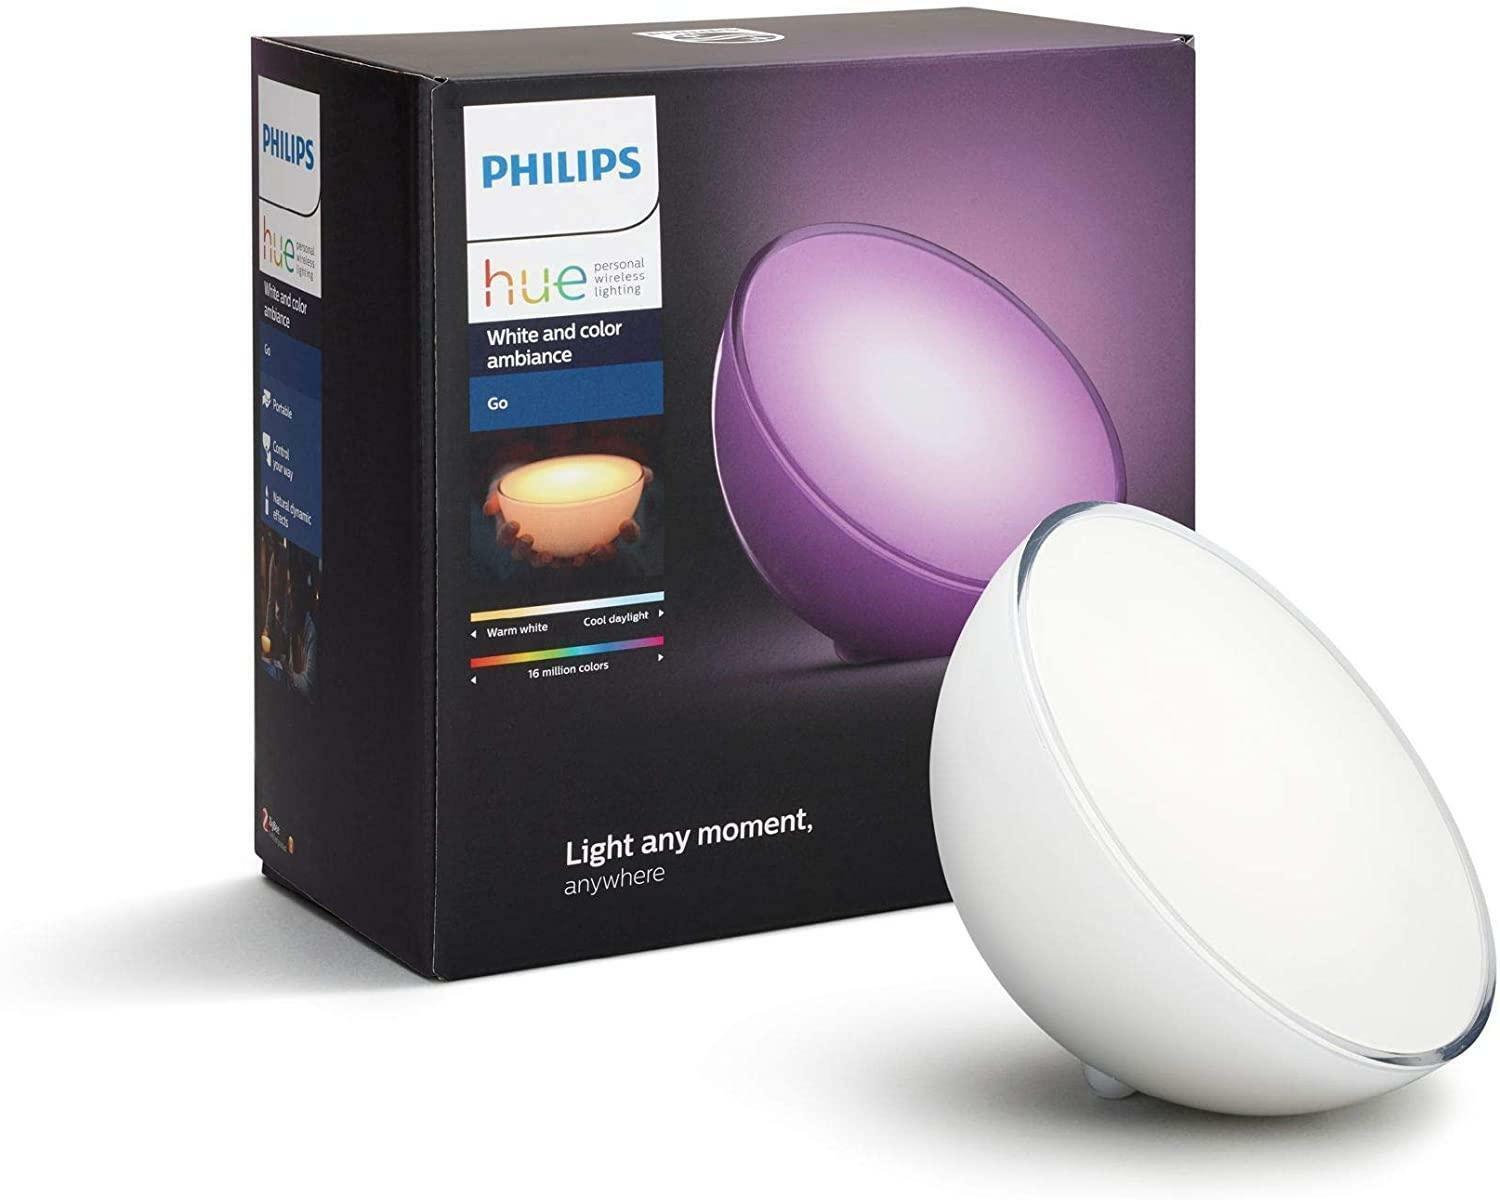 PHILIPS PHILIPS HUE GO LAMPADA WIRELESS WHITE AND COLOR AMBIANCE